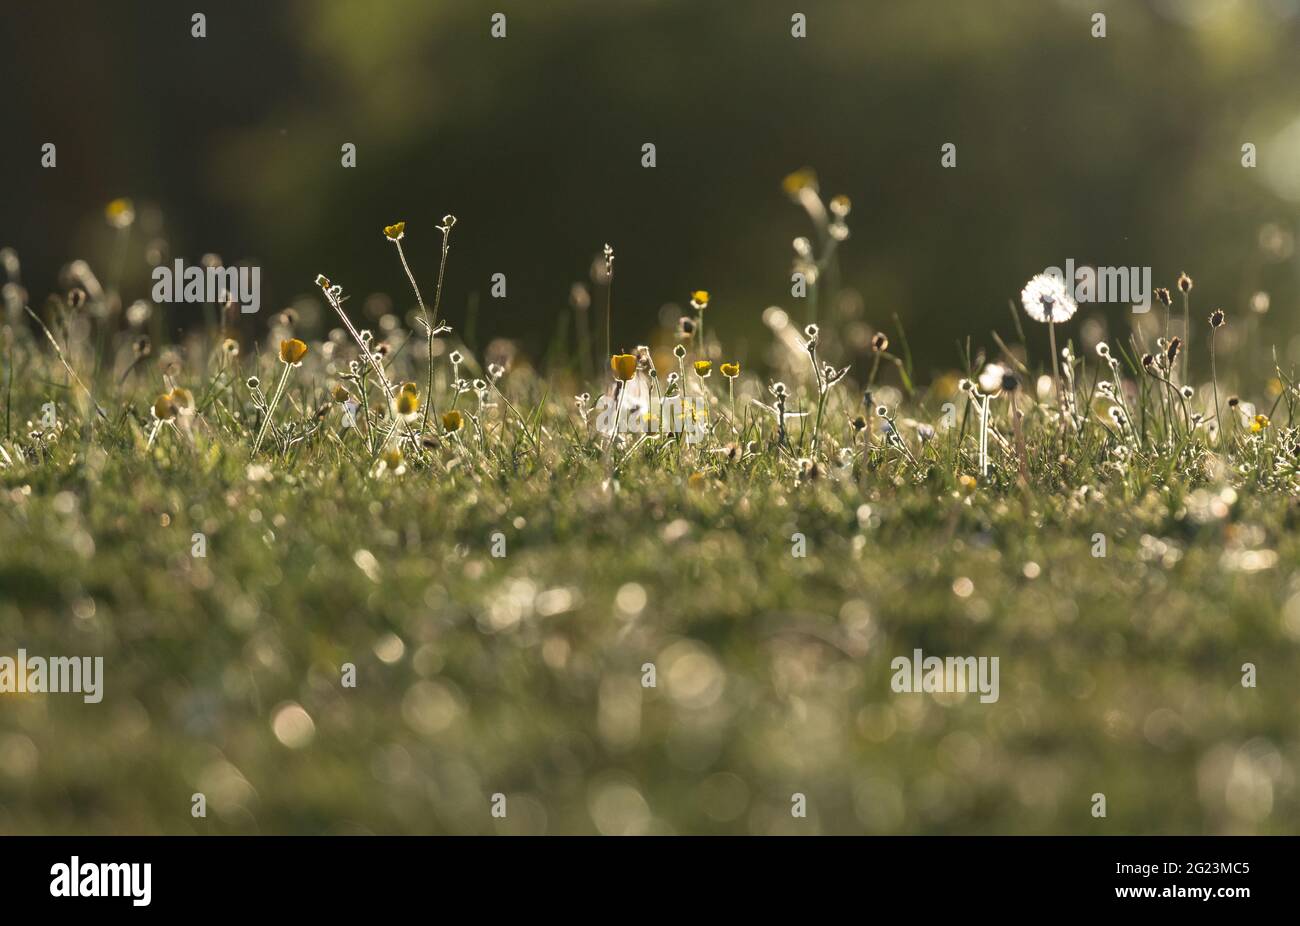 Dewy grass, buttercups and dandelion seedheads with a bokeh background. Stock Photo